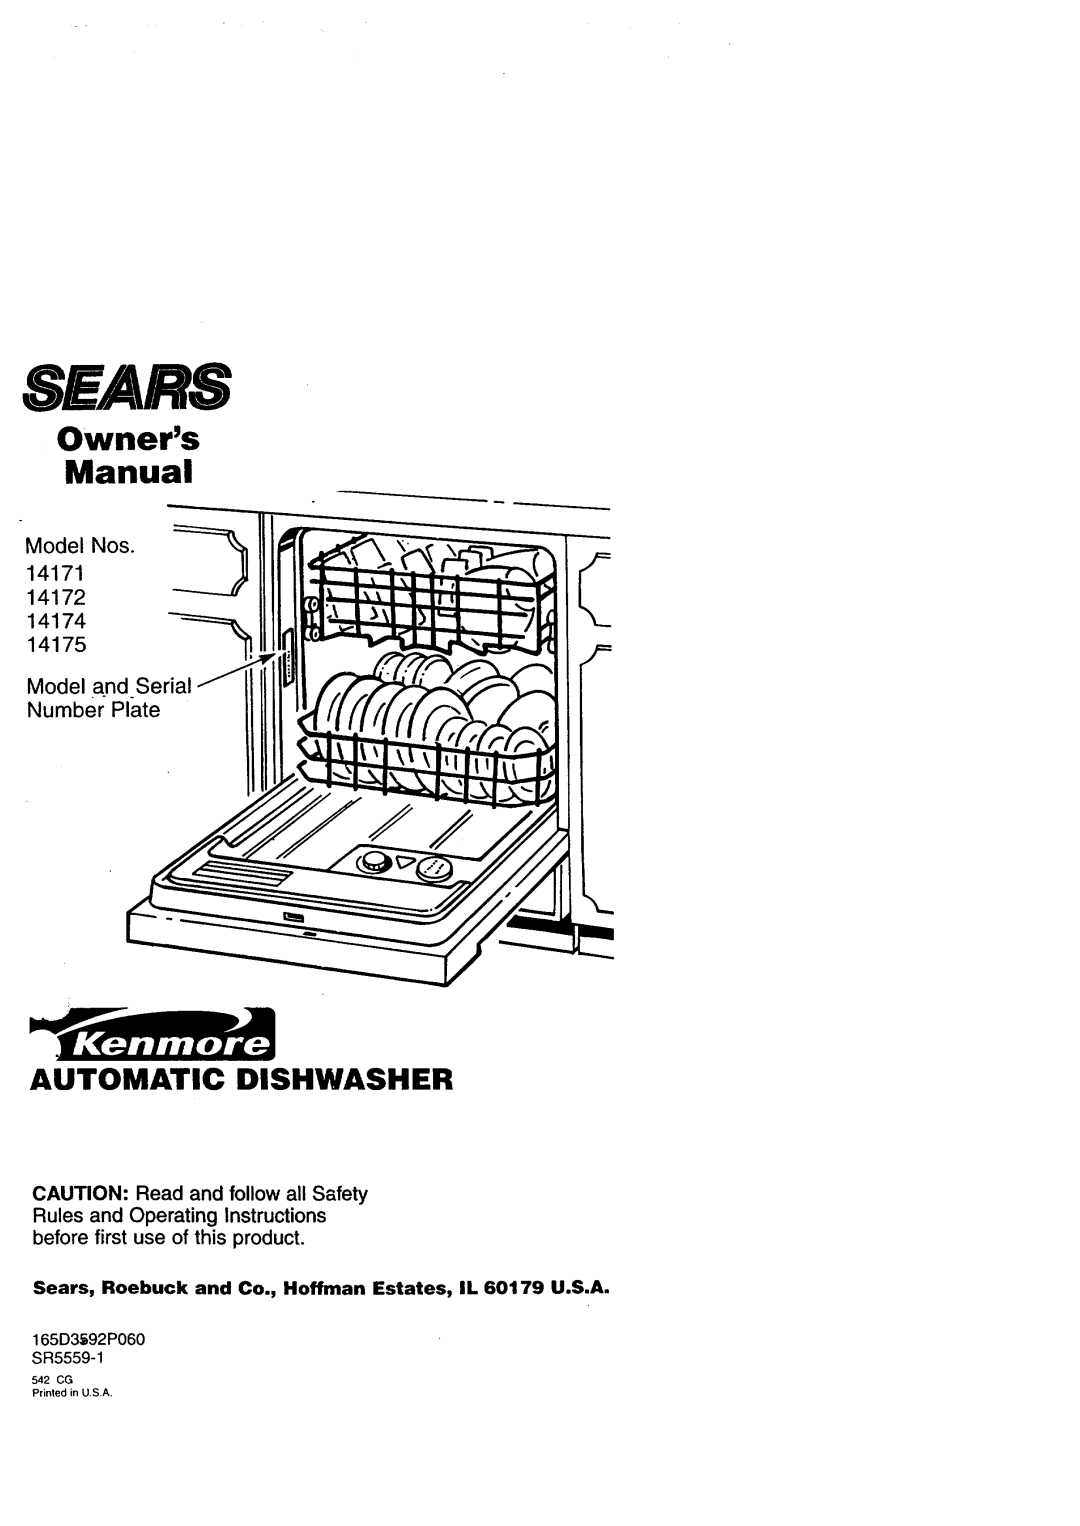 Sears 14171, 14172, 14174, 14175 owner manual Sears, Automatic Dishwasher, Model Nos, Model and Serial Number Plate 